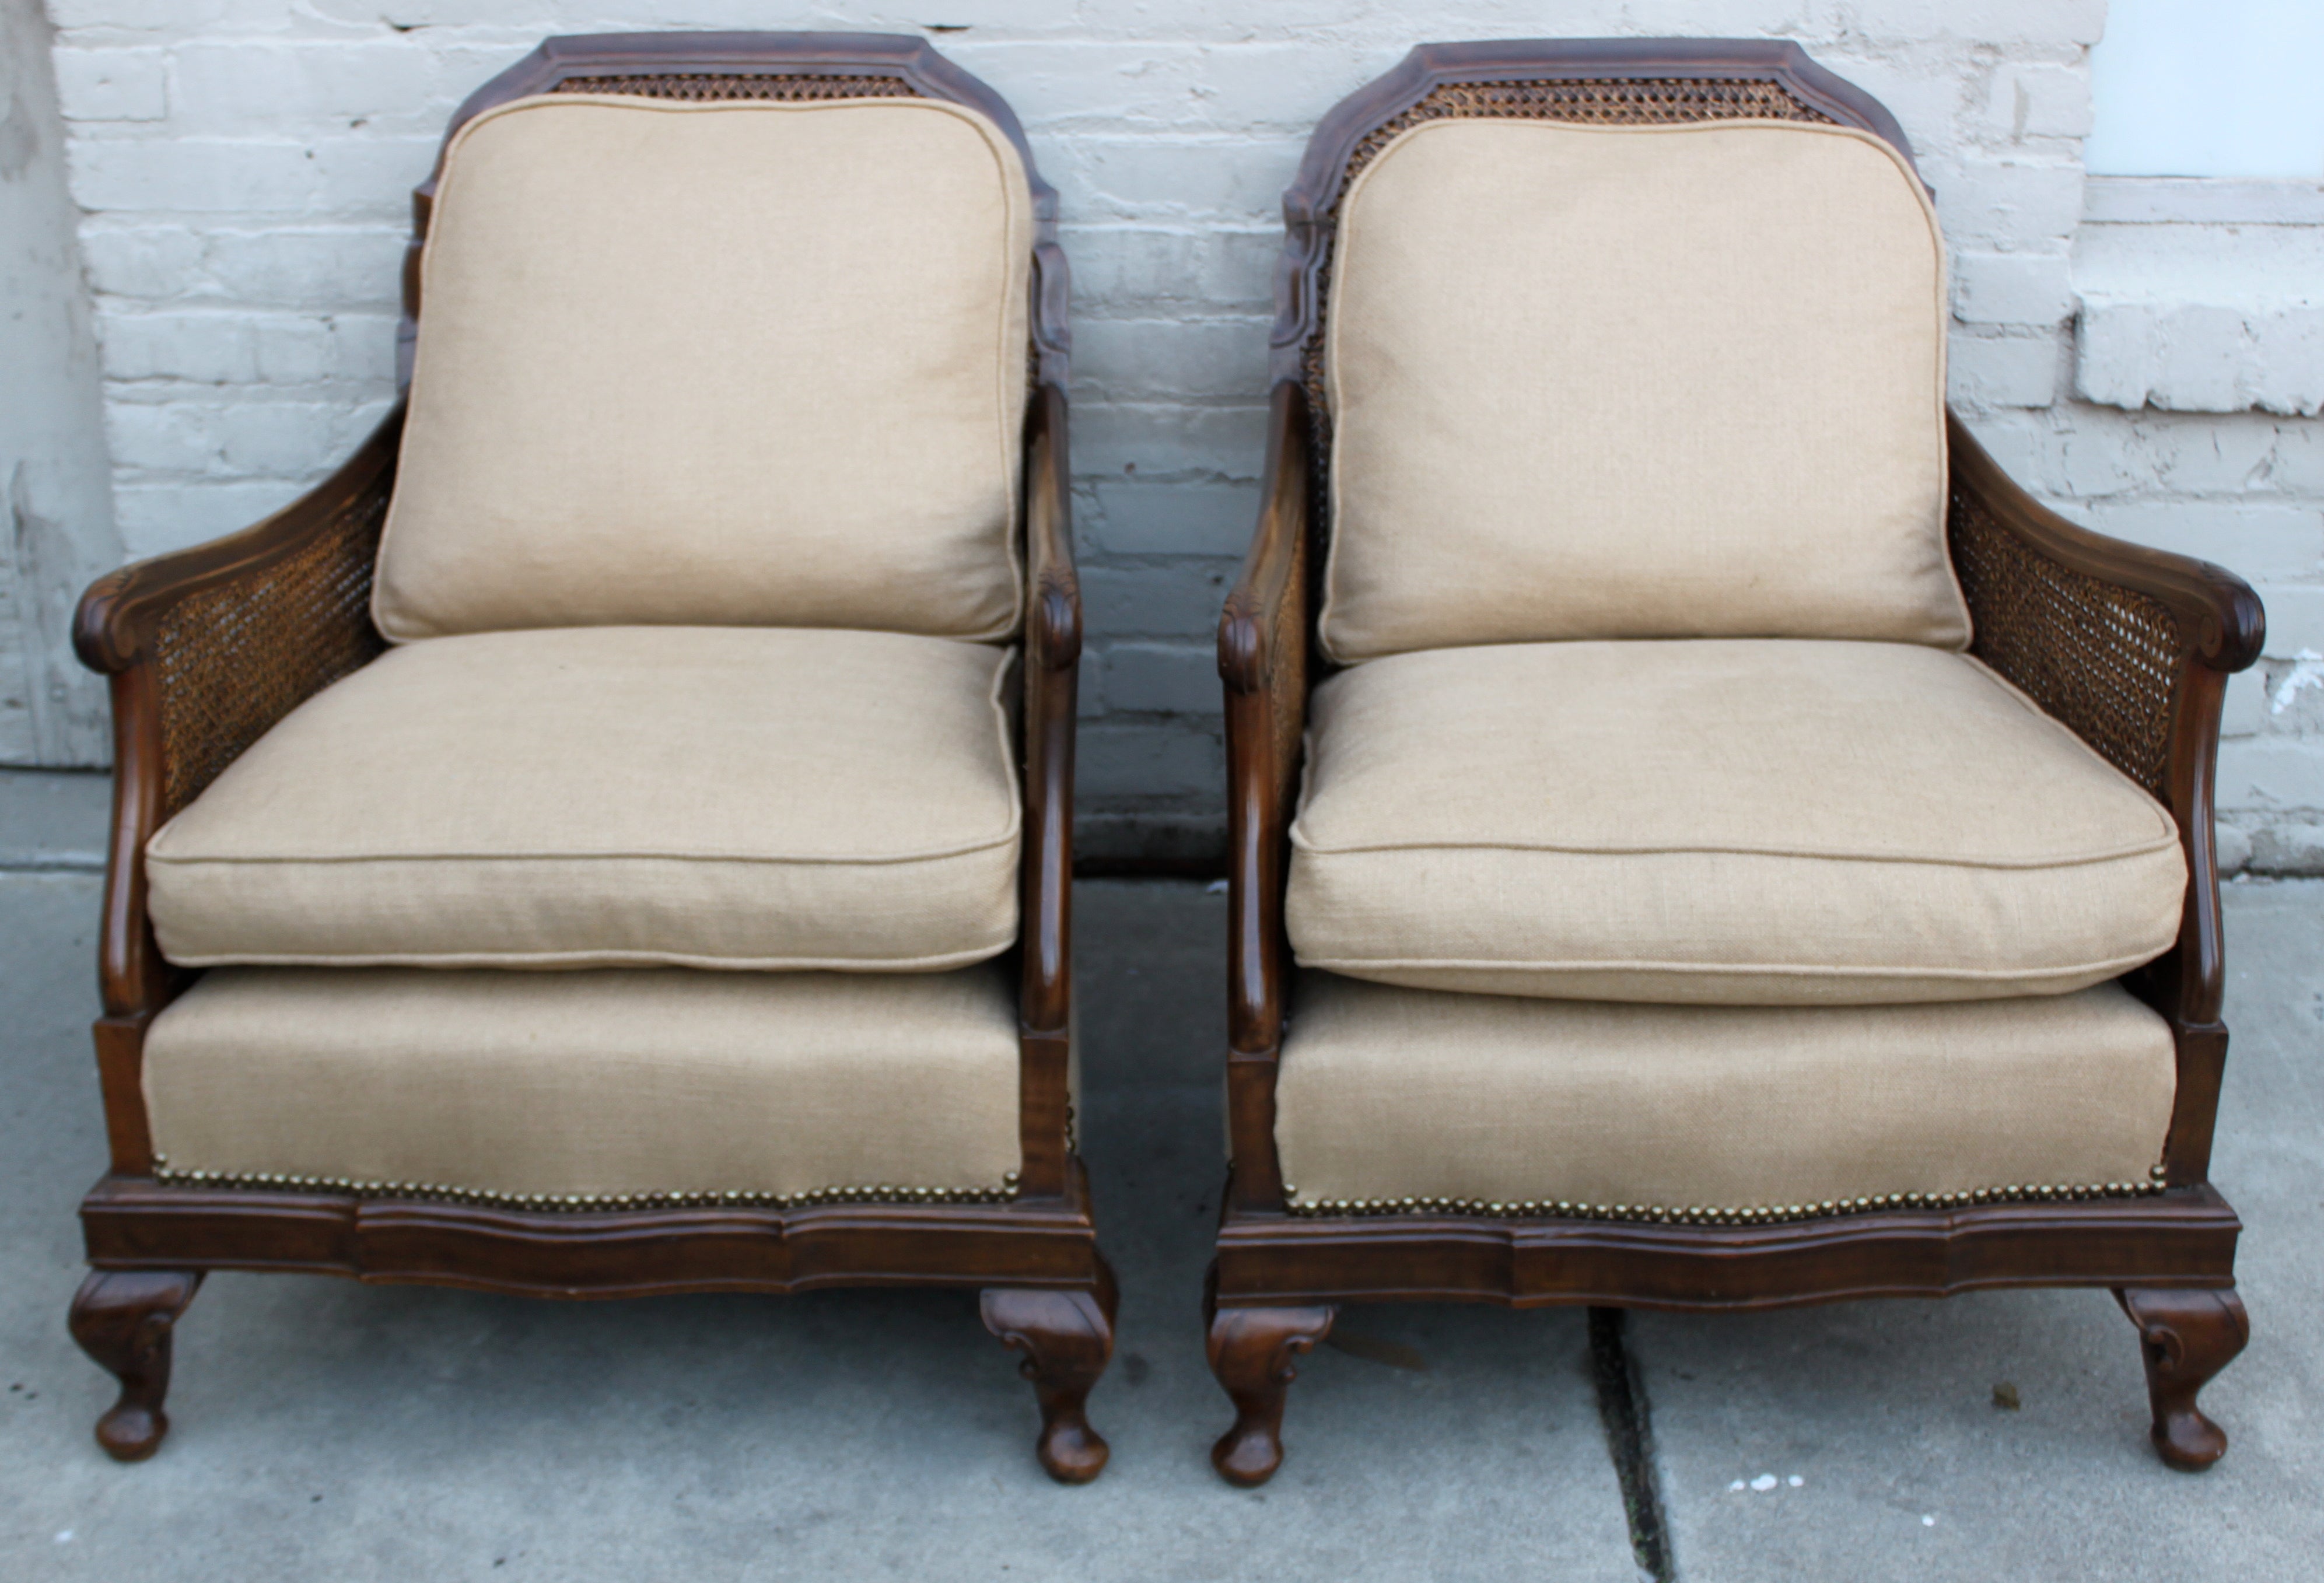 Pair of Double Caned Armchairs C. 1930's